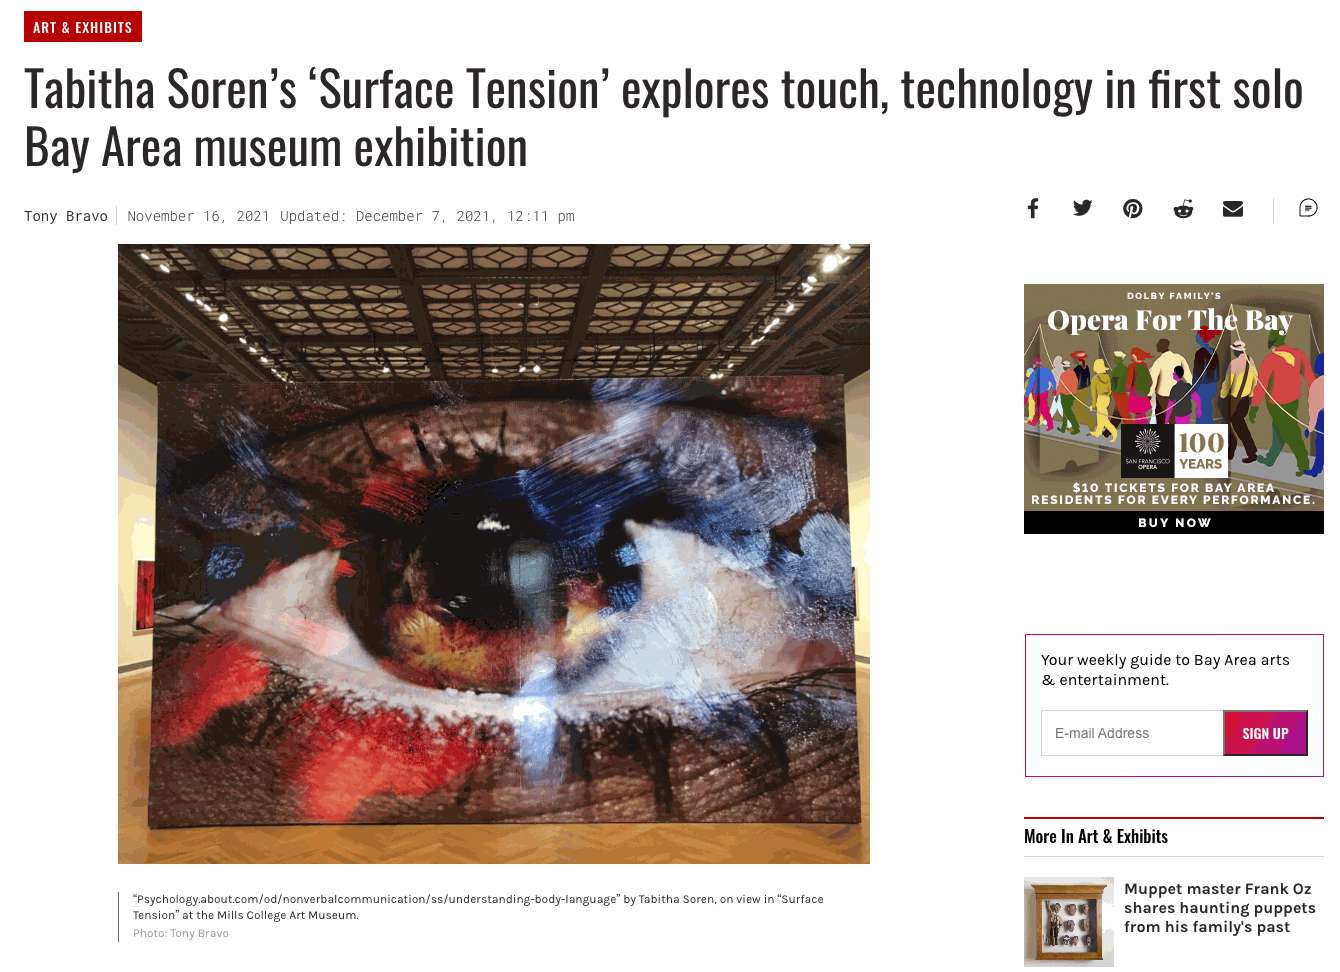 Tabitha Soren’s ‘Surface Tension’ explores touch, technology in first solo Bay Area museum exhibition